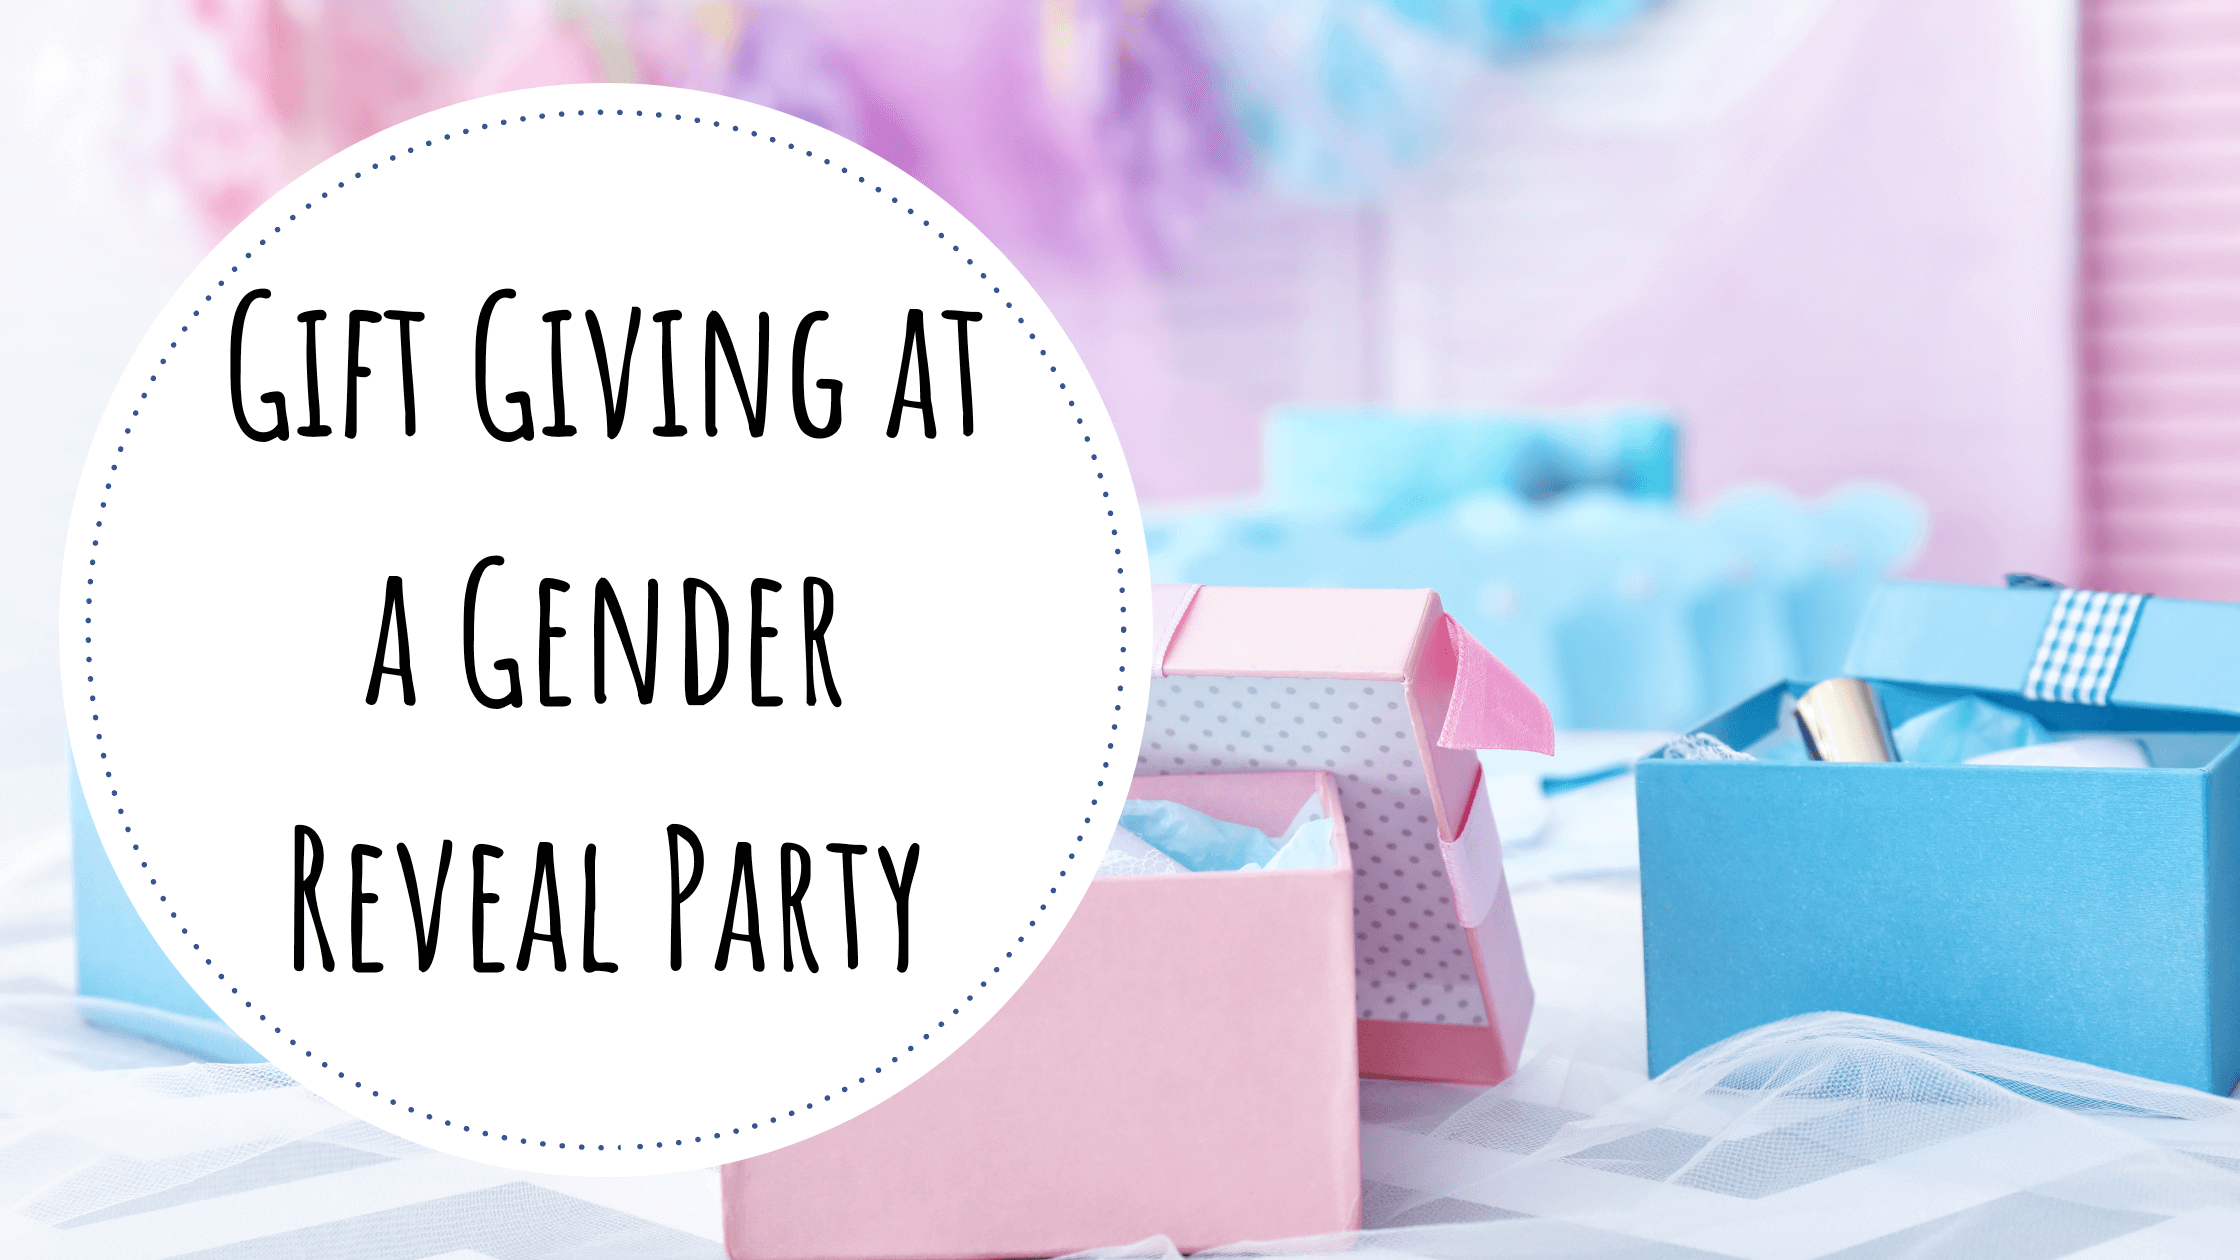 Gift Giving at a Gender Reveal Party: Do You Bring a Present or